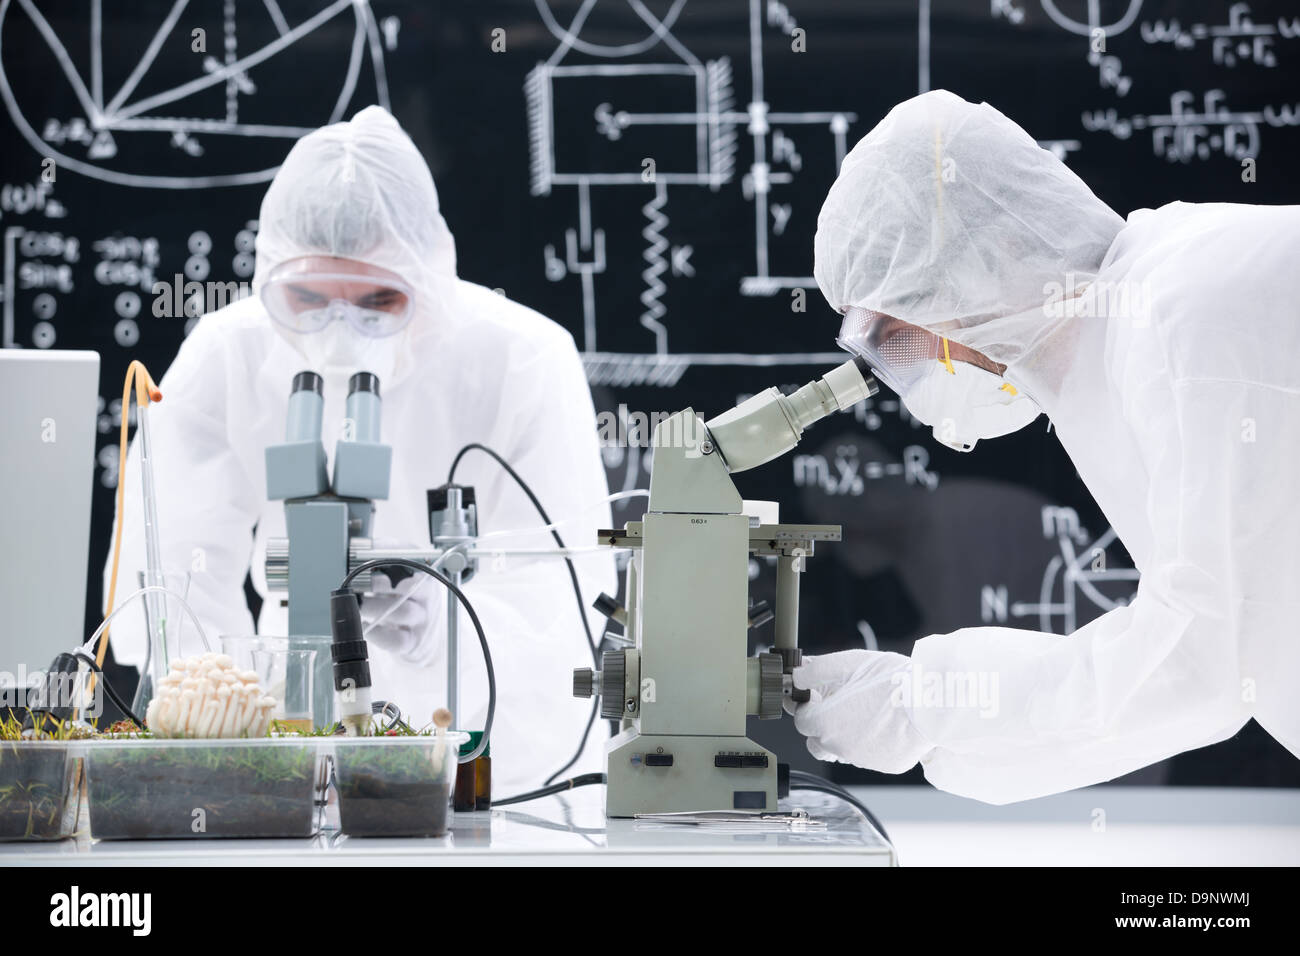 close-up of two scientists manipulating microscopes in a chemistry lab on a worktable with a blackboard on the background Stock Photo